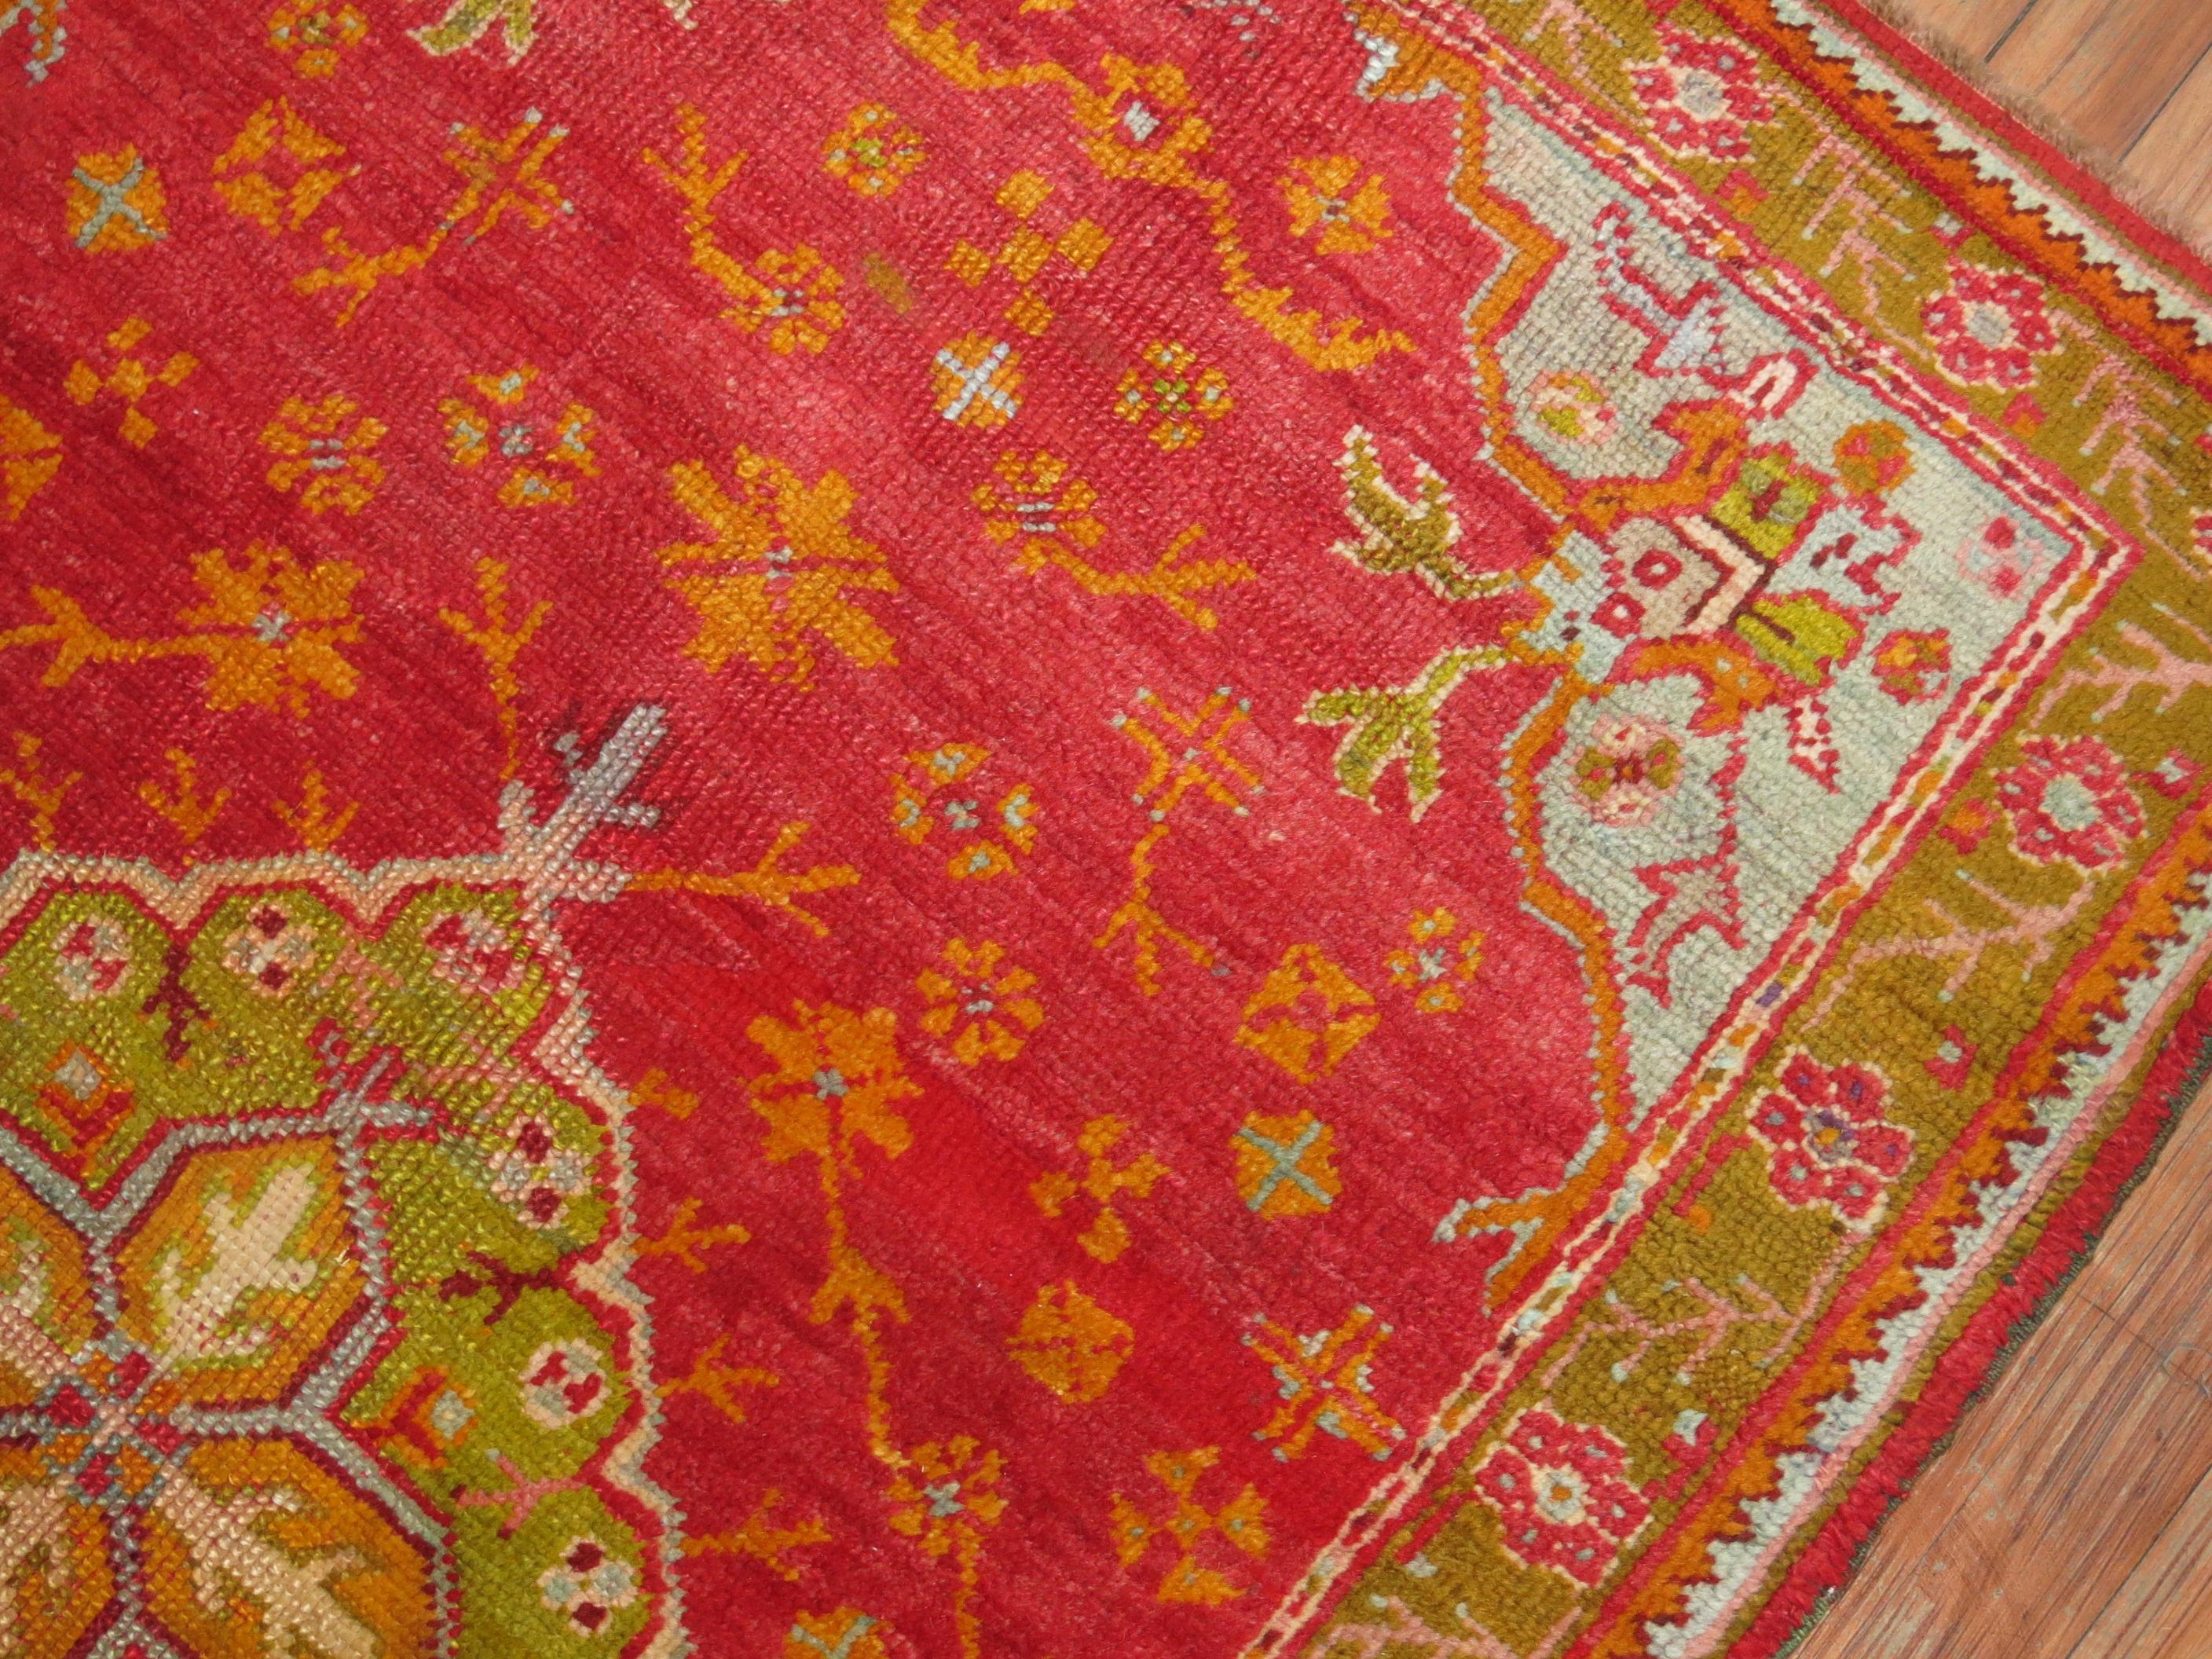 20th Century Antique Turkish Oushak Rug in Bright Colors